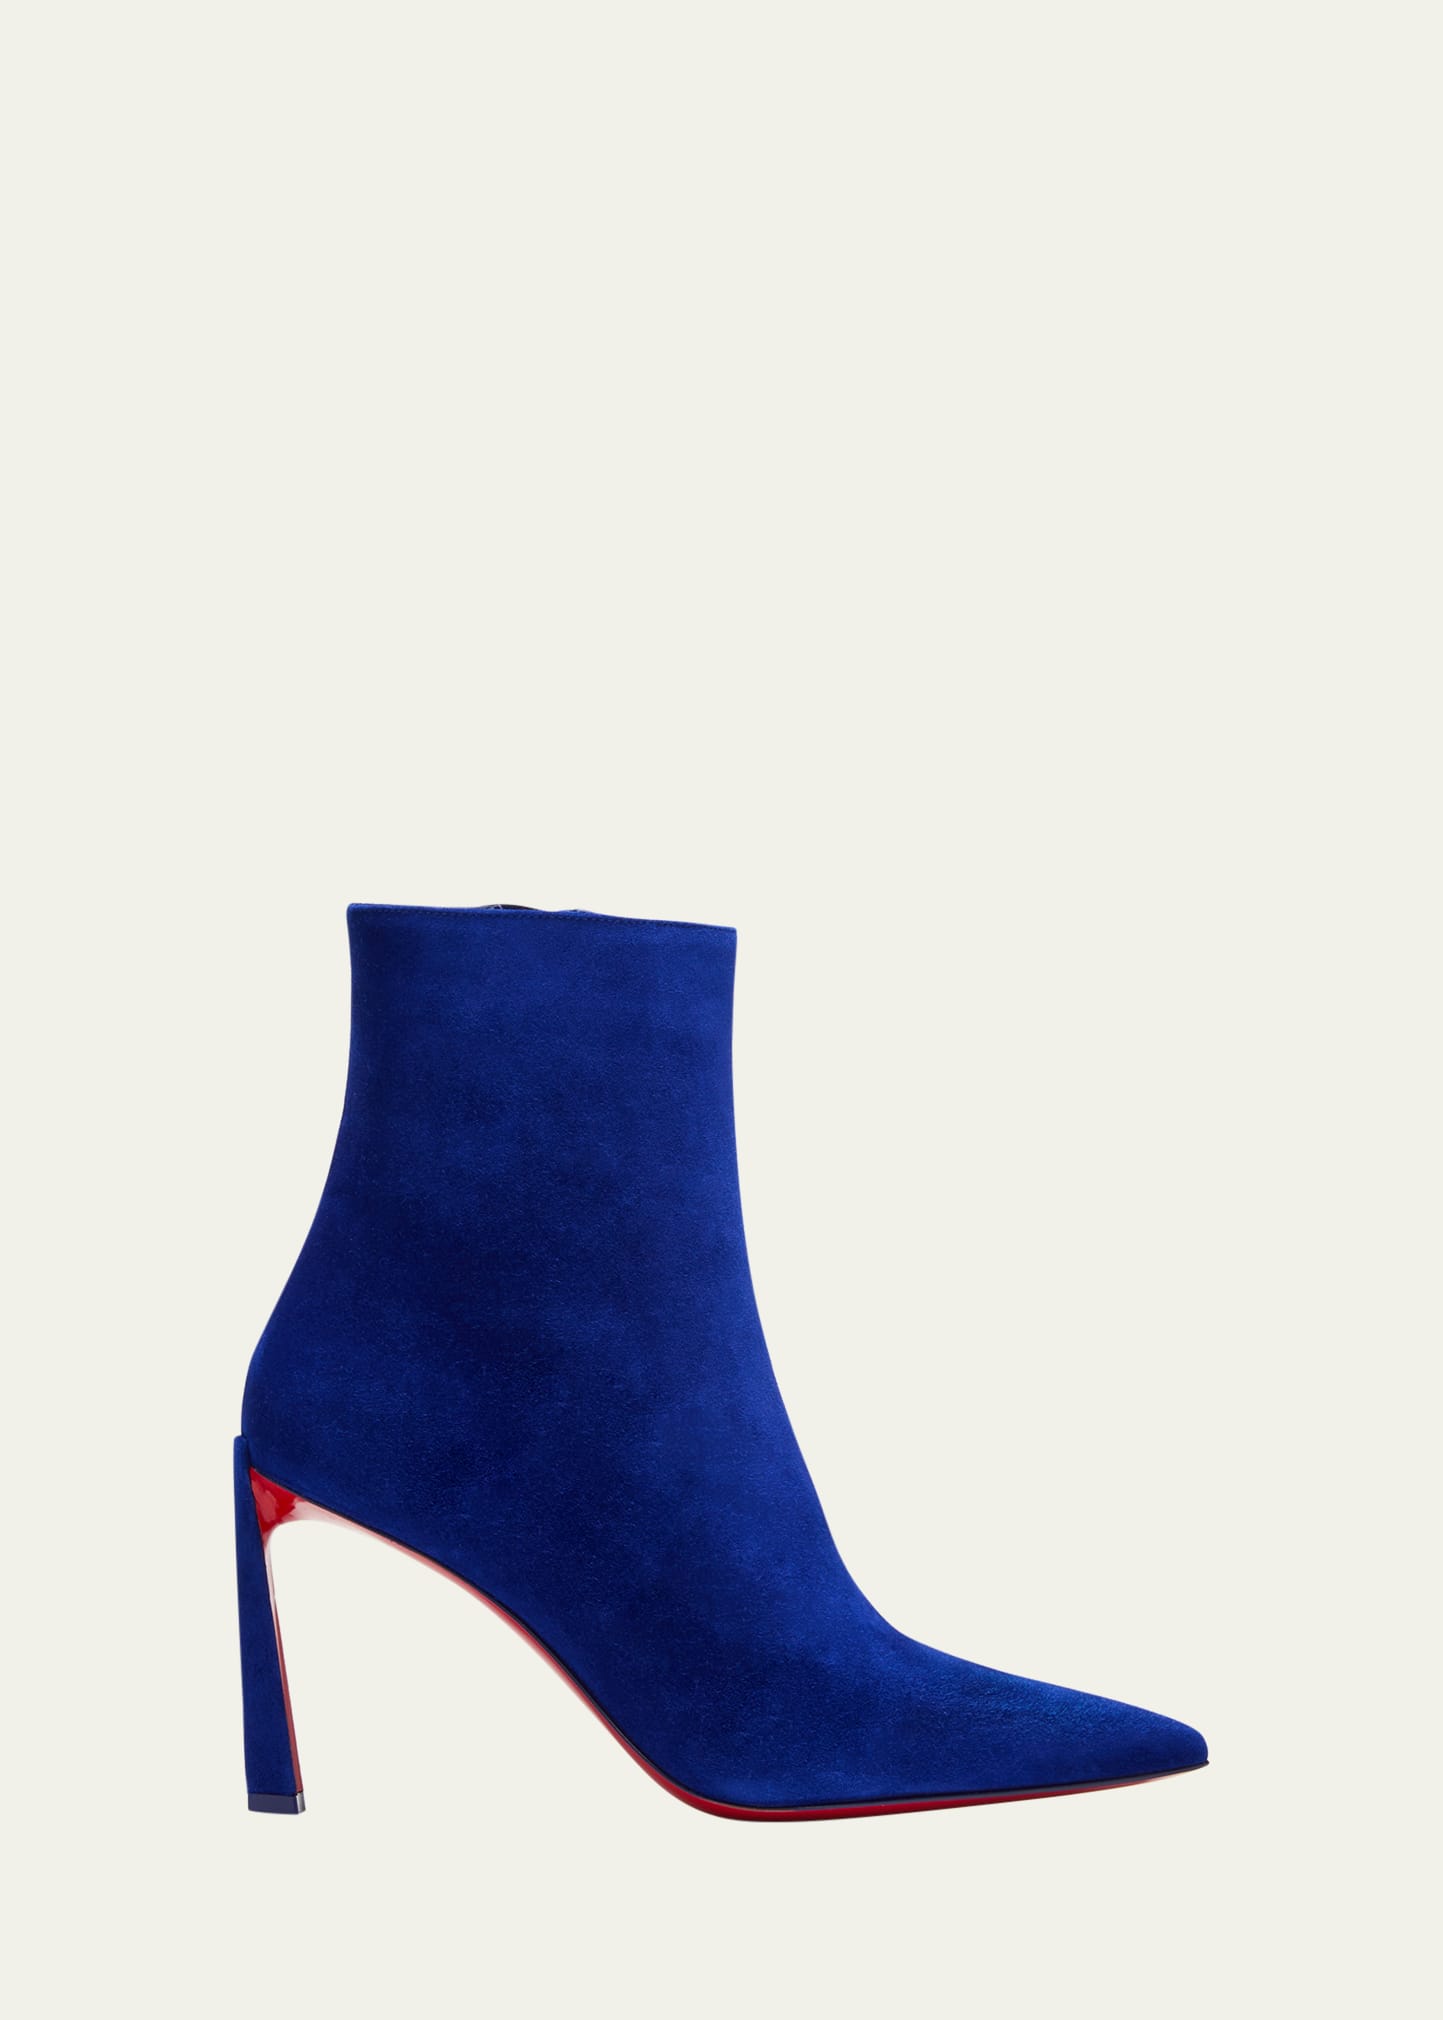 CHRISTIAN LOUBOUTIN CONDORA SUEDE STILETTO RED SOLE BOOTIES